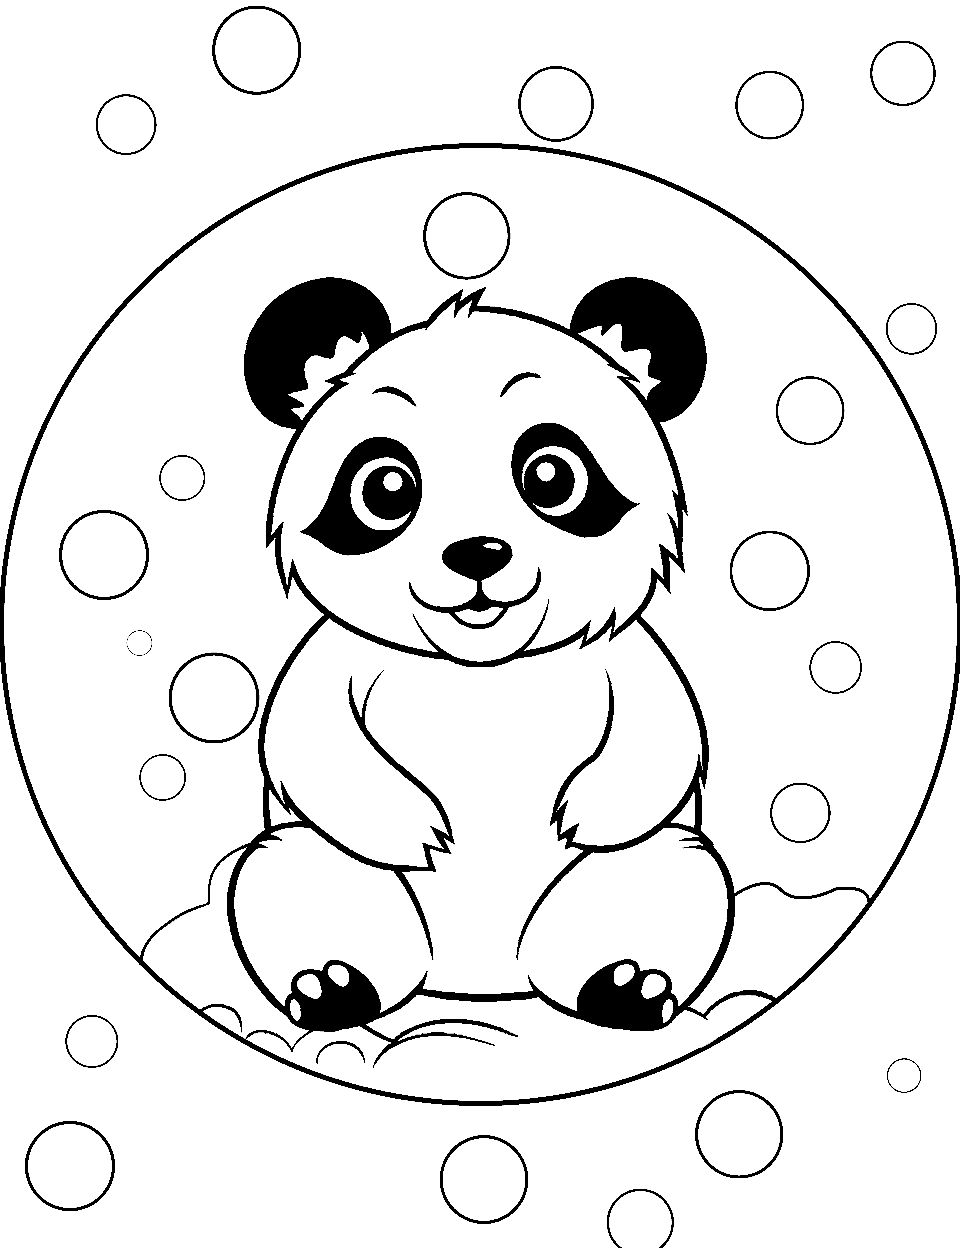 Panda in a Bubble Coloring Page - A playful panda floating inside a transparent bubble, with wide-eyed wonder.